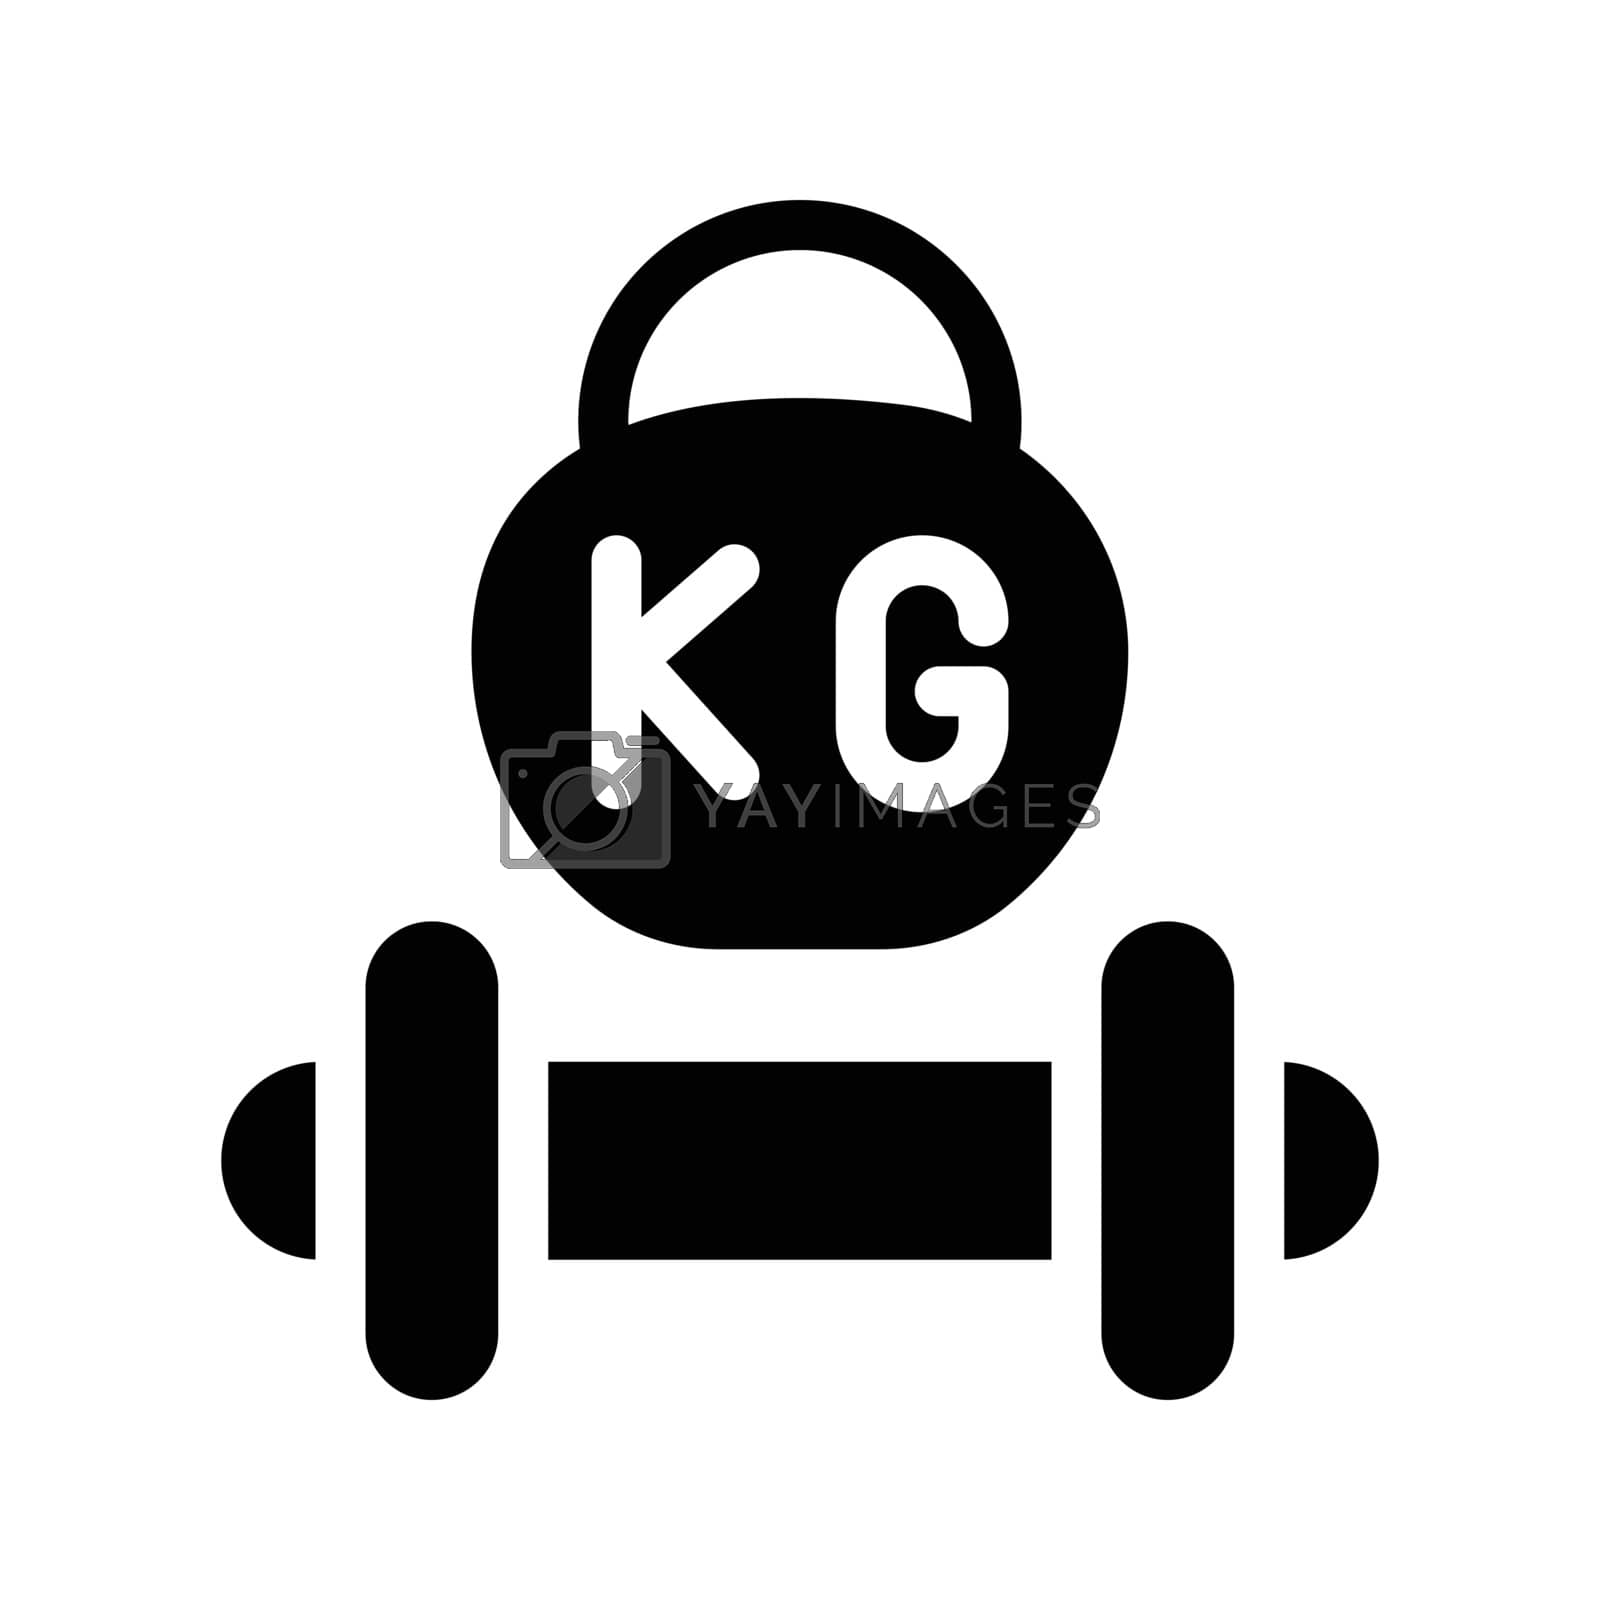 Royalty free image of fitness by vectorstall